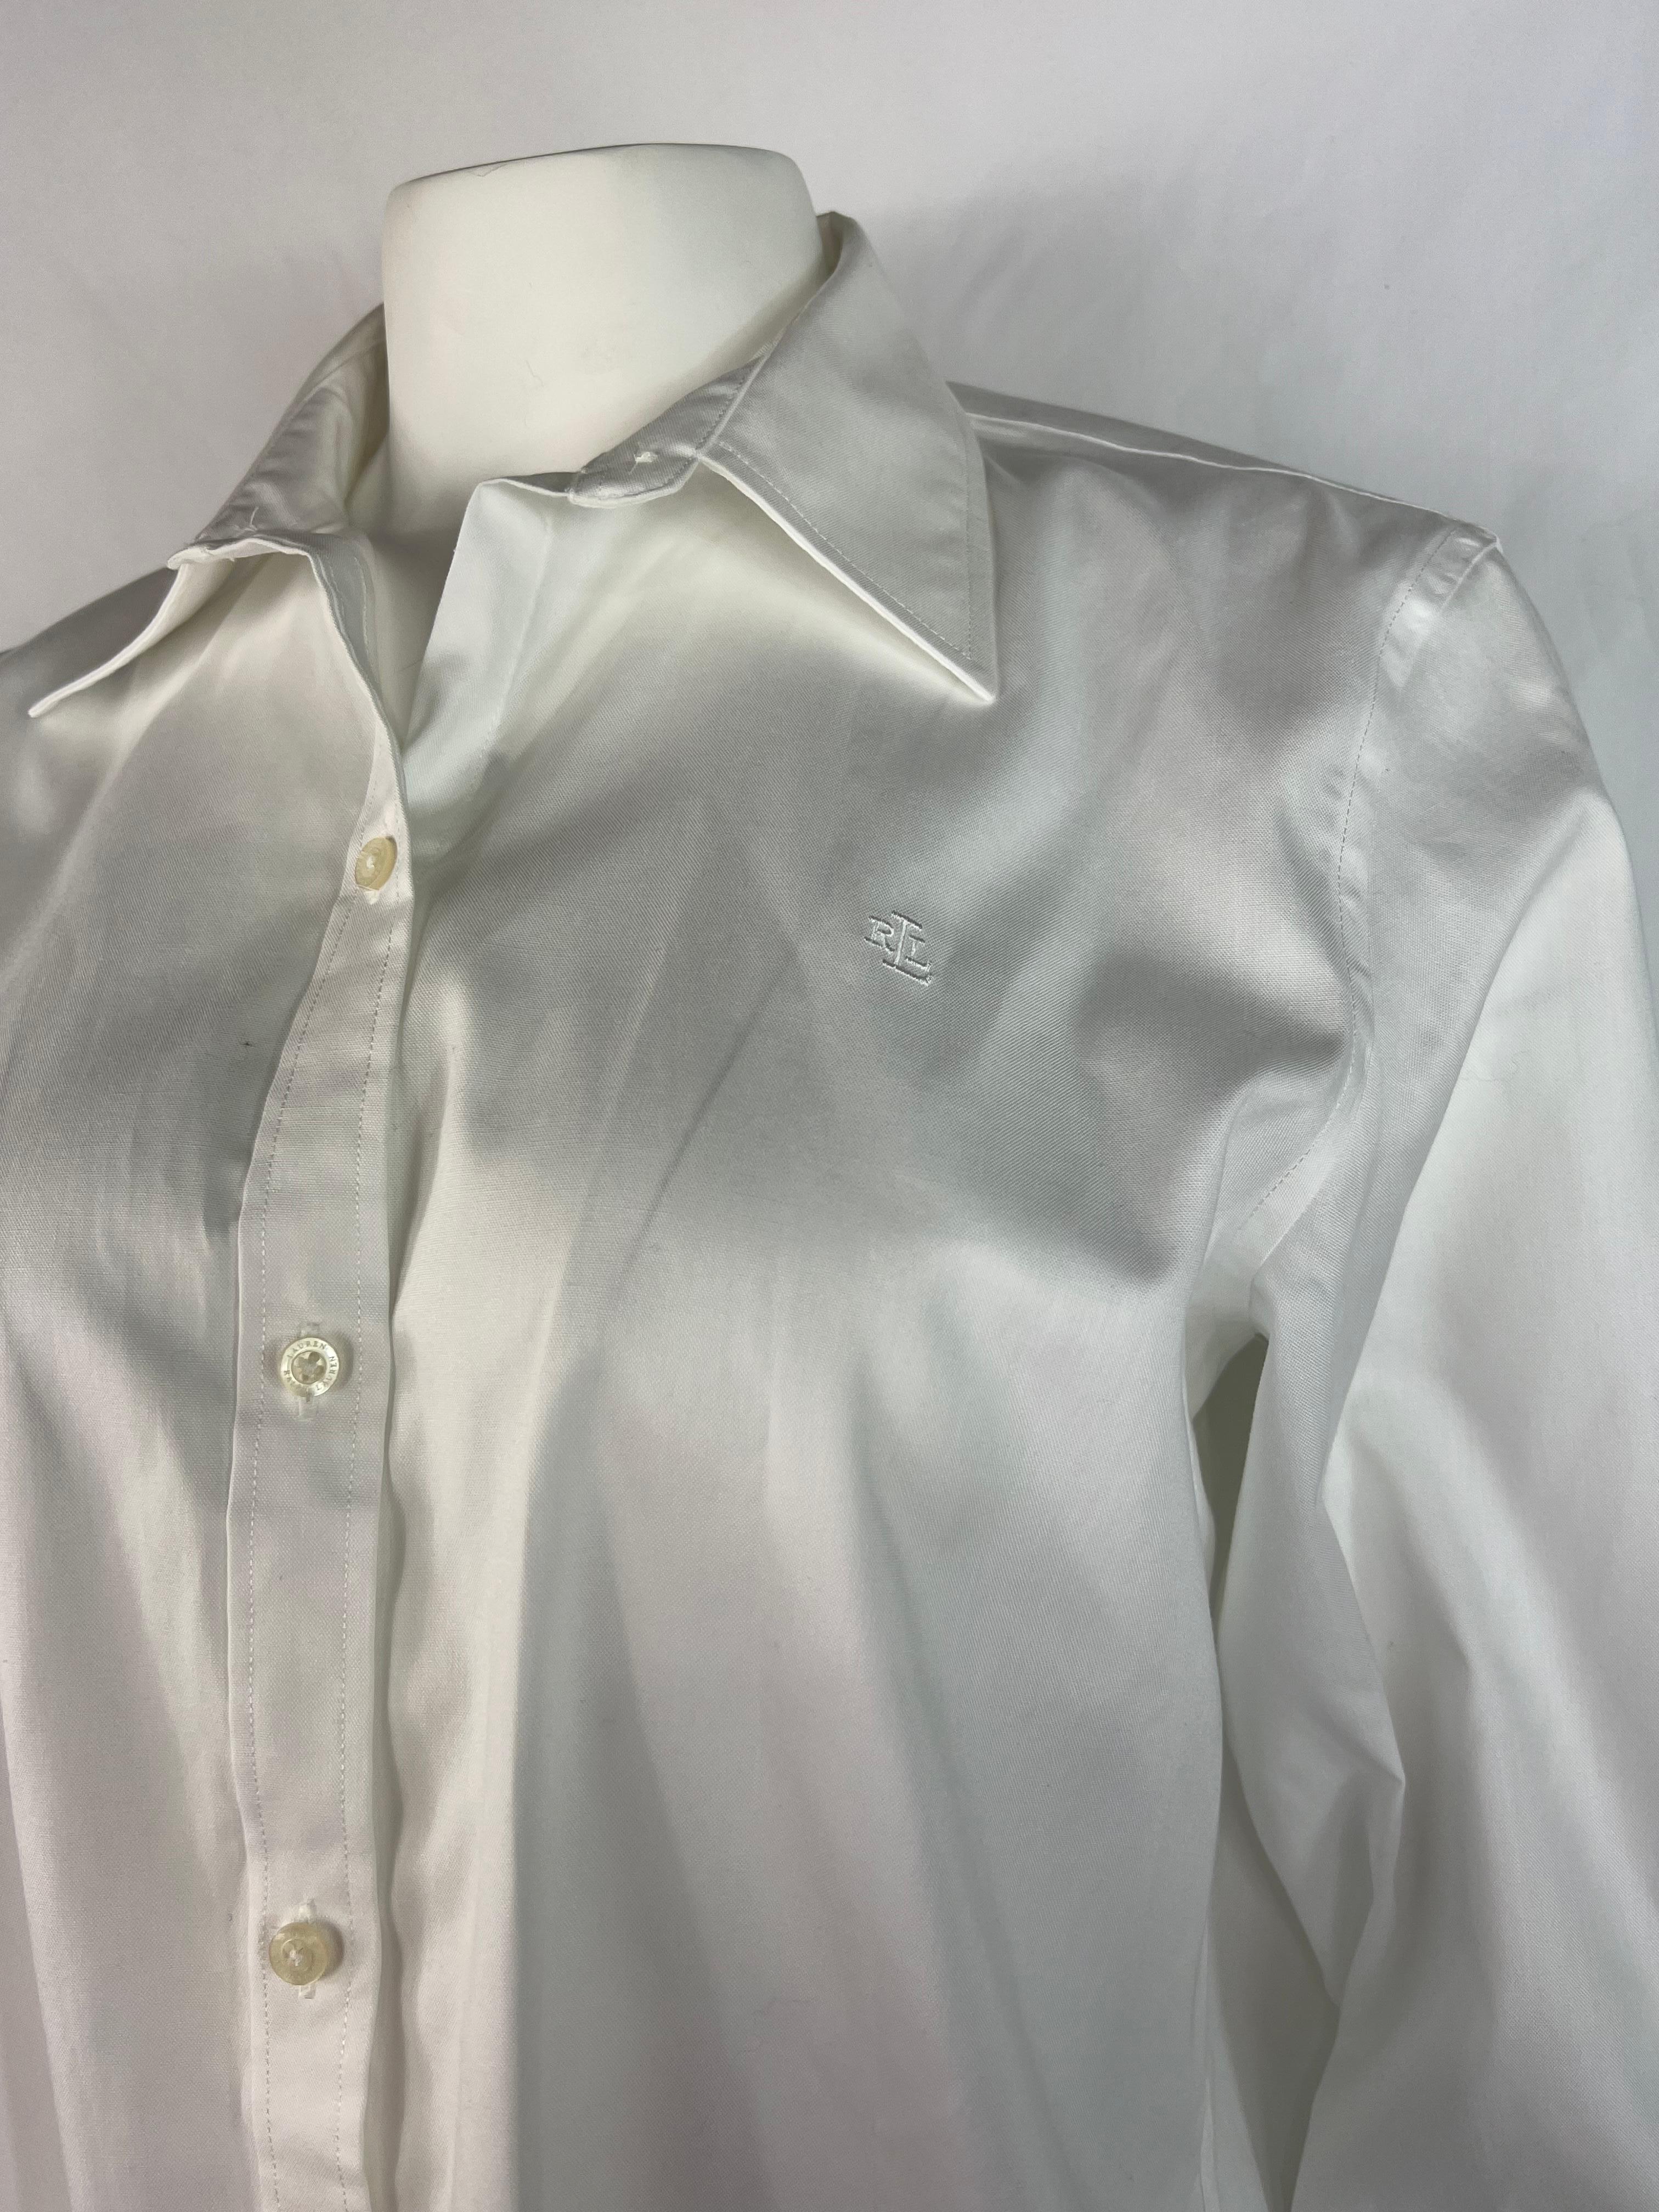 Product details:

The blouse features collar, front button down closure with button detail on the sleeves.